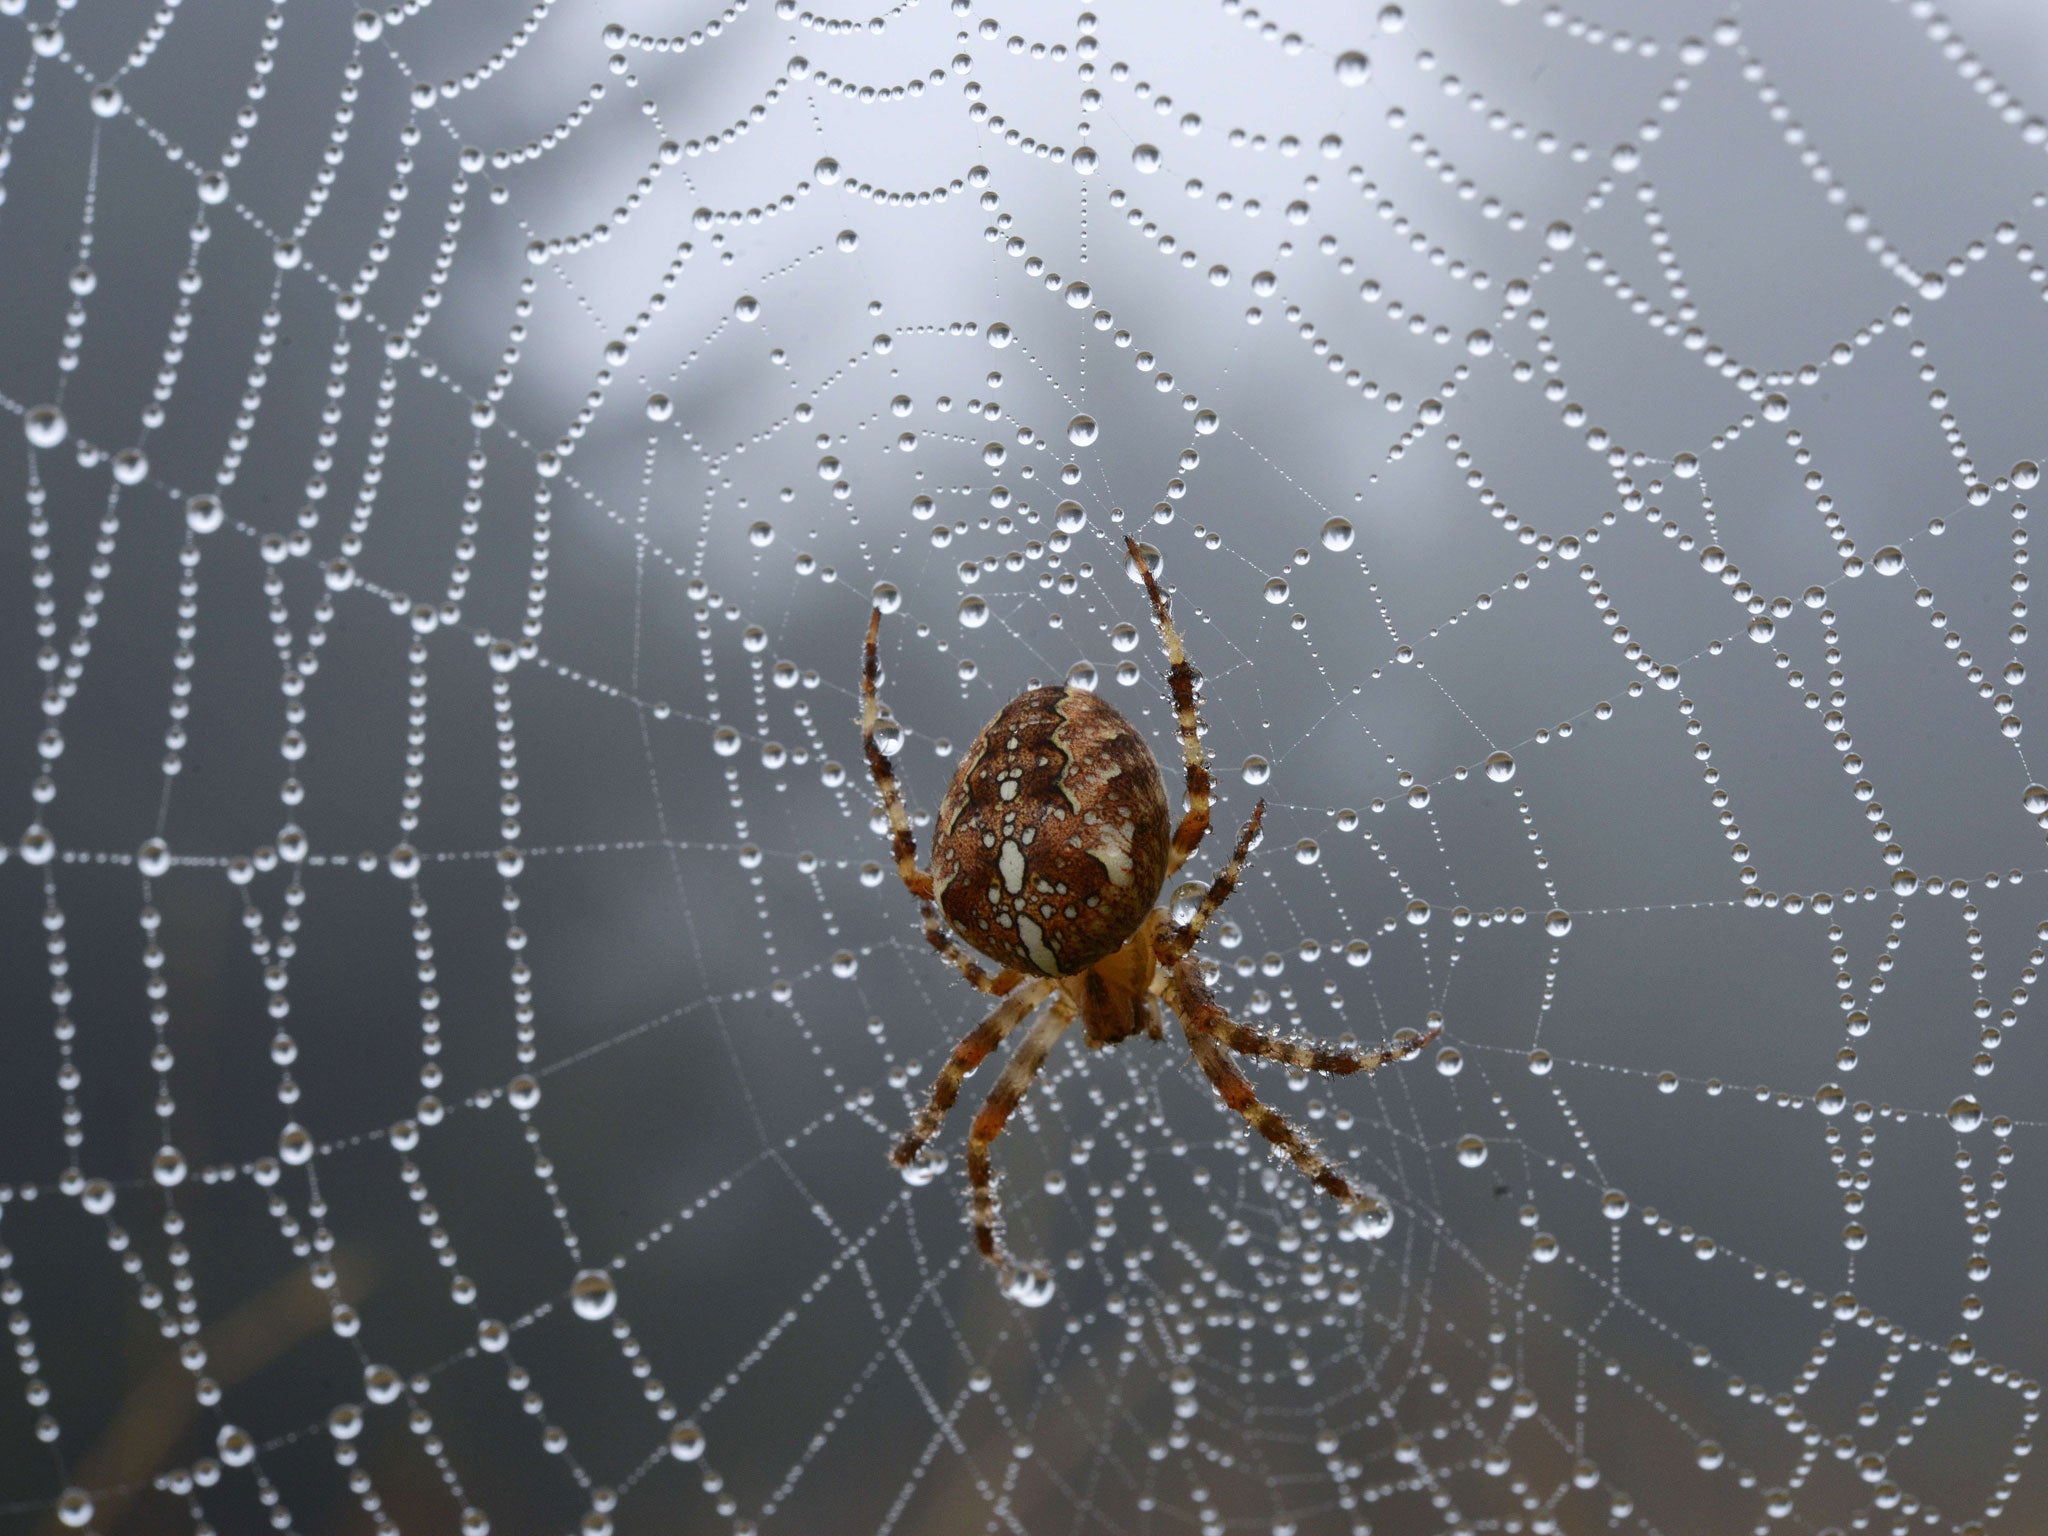 Spiders are spotted more frequently in autumn, during their mating season